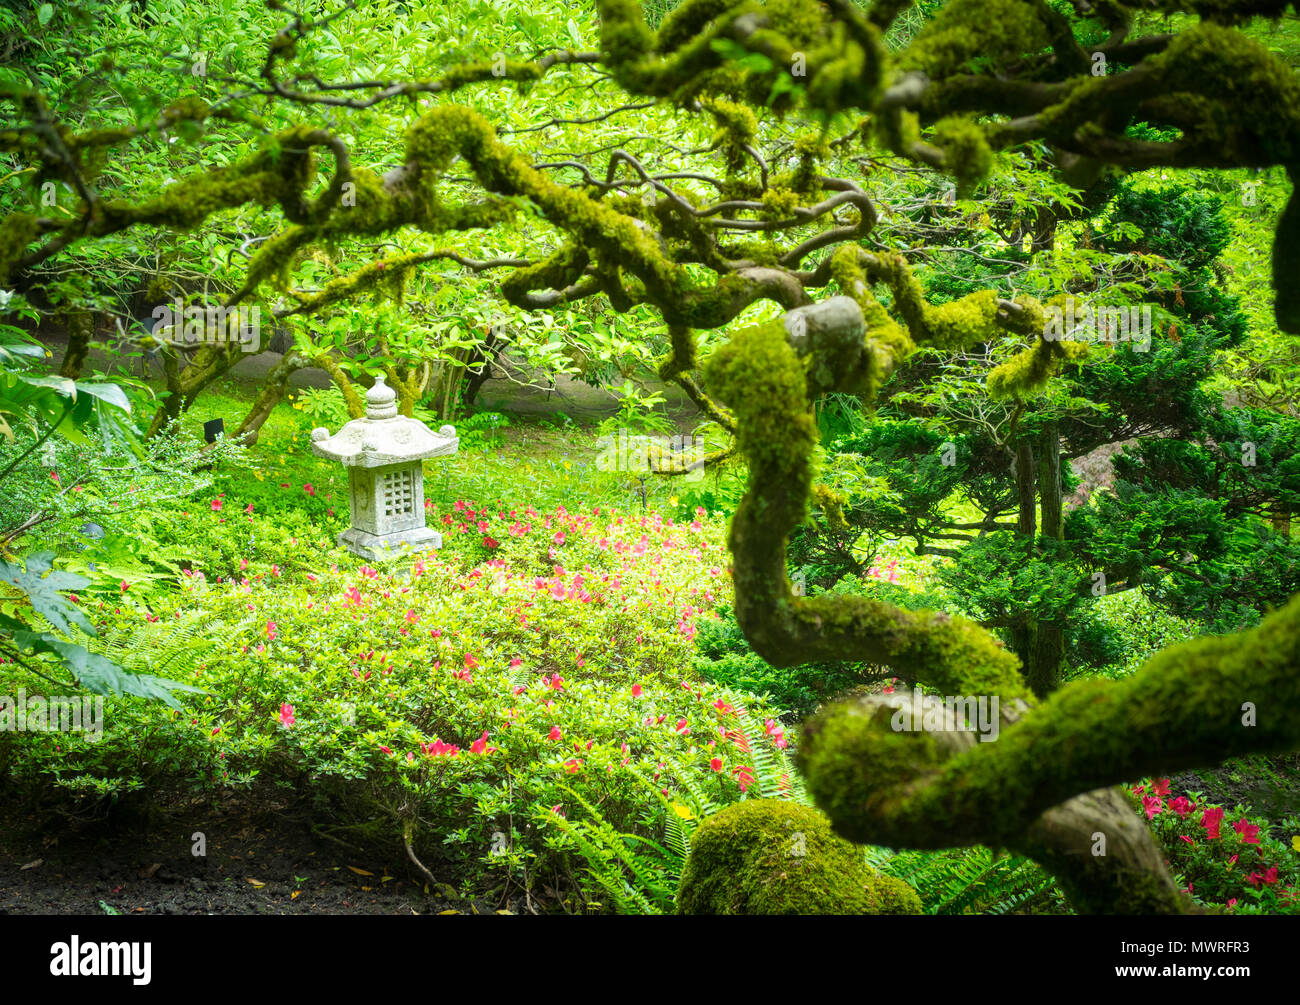 Moss covered branches, Japanese maples, and a Japanese stone lantern adorn the Japanese Garden at Butchart Gardens in summer.  Brentwood Bay, Canada. Stock Photo